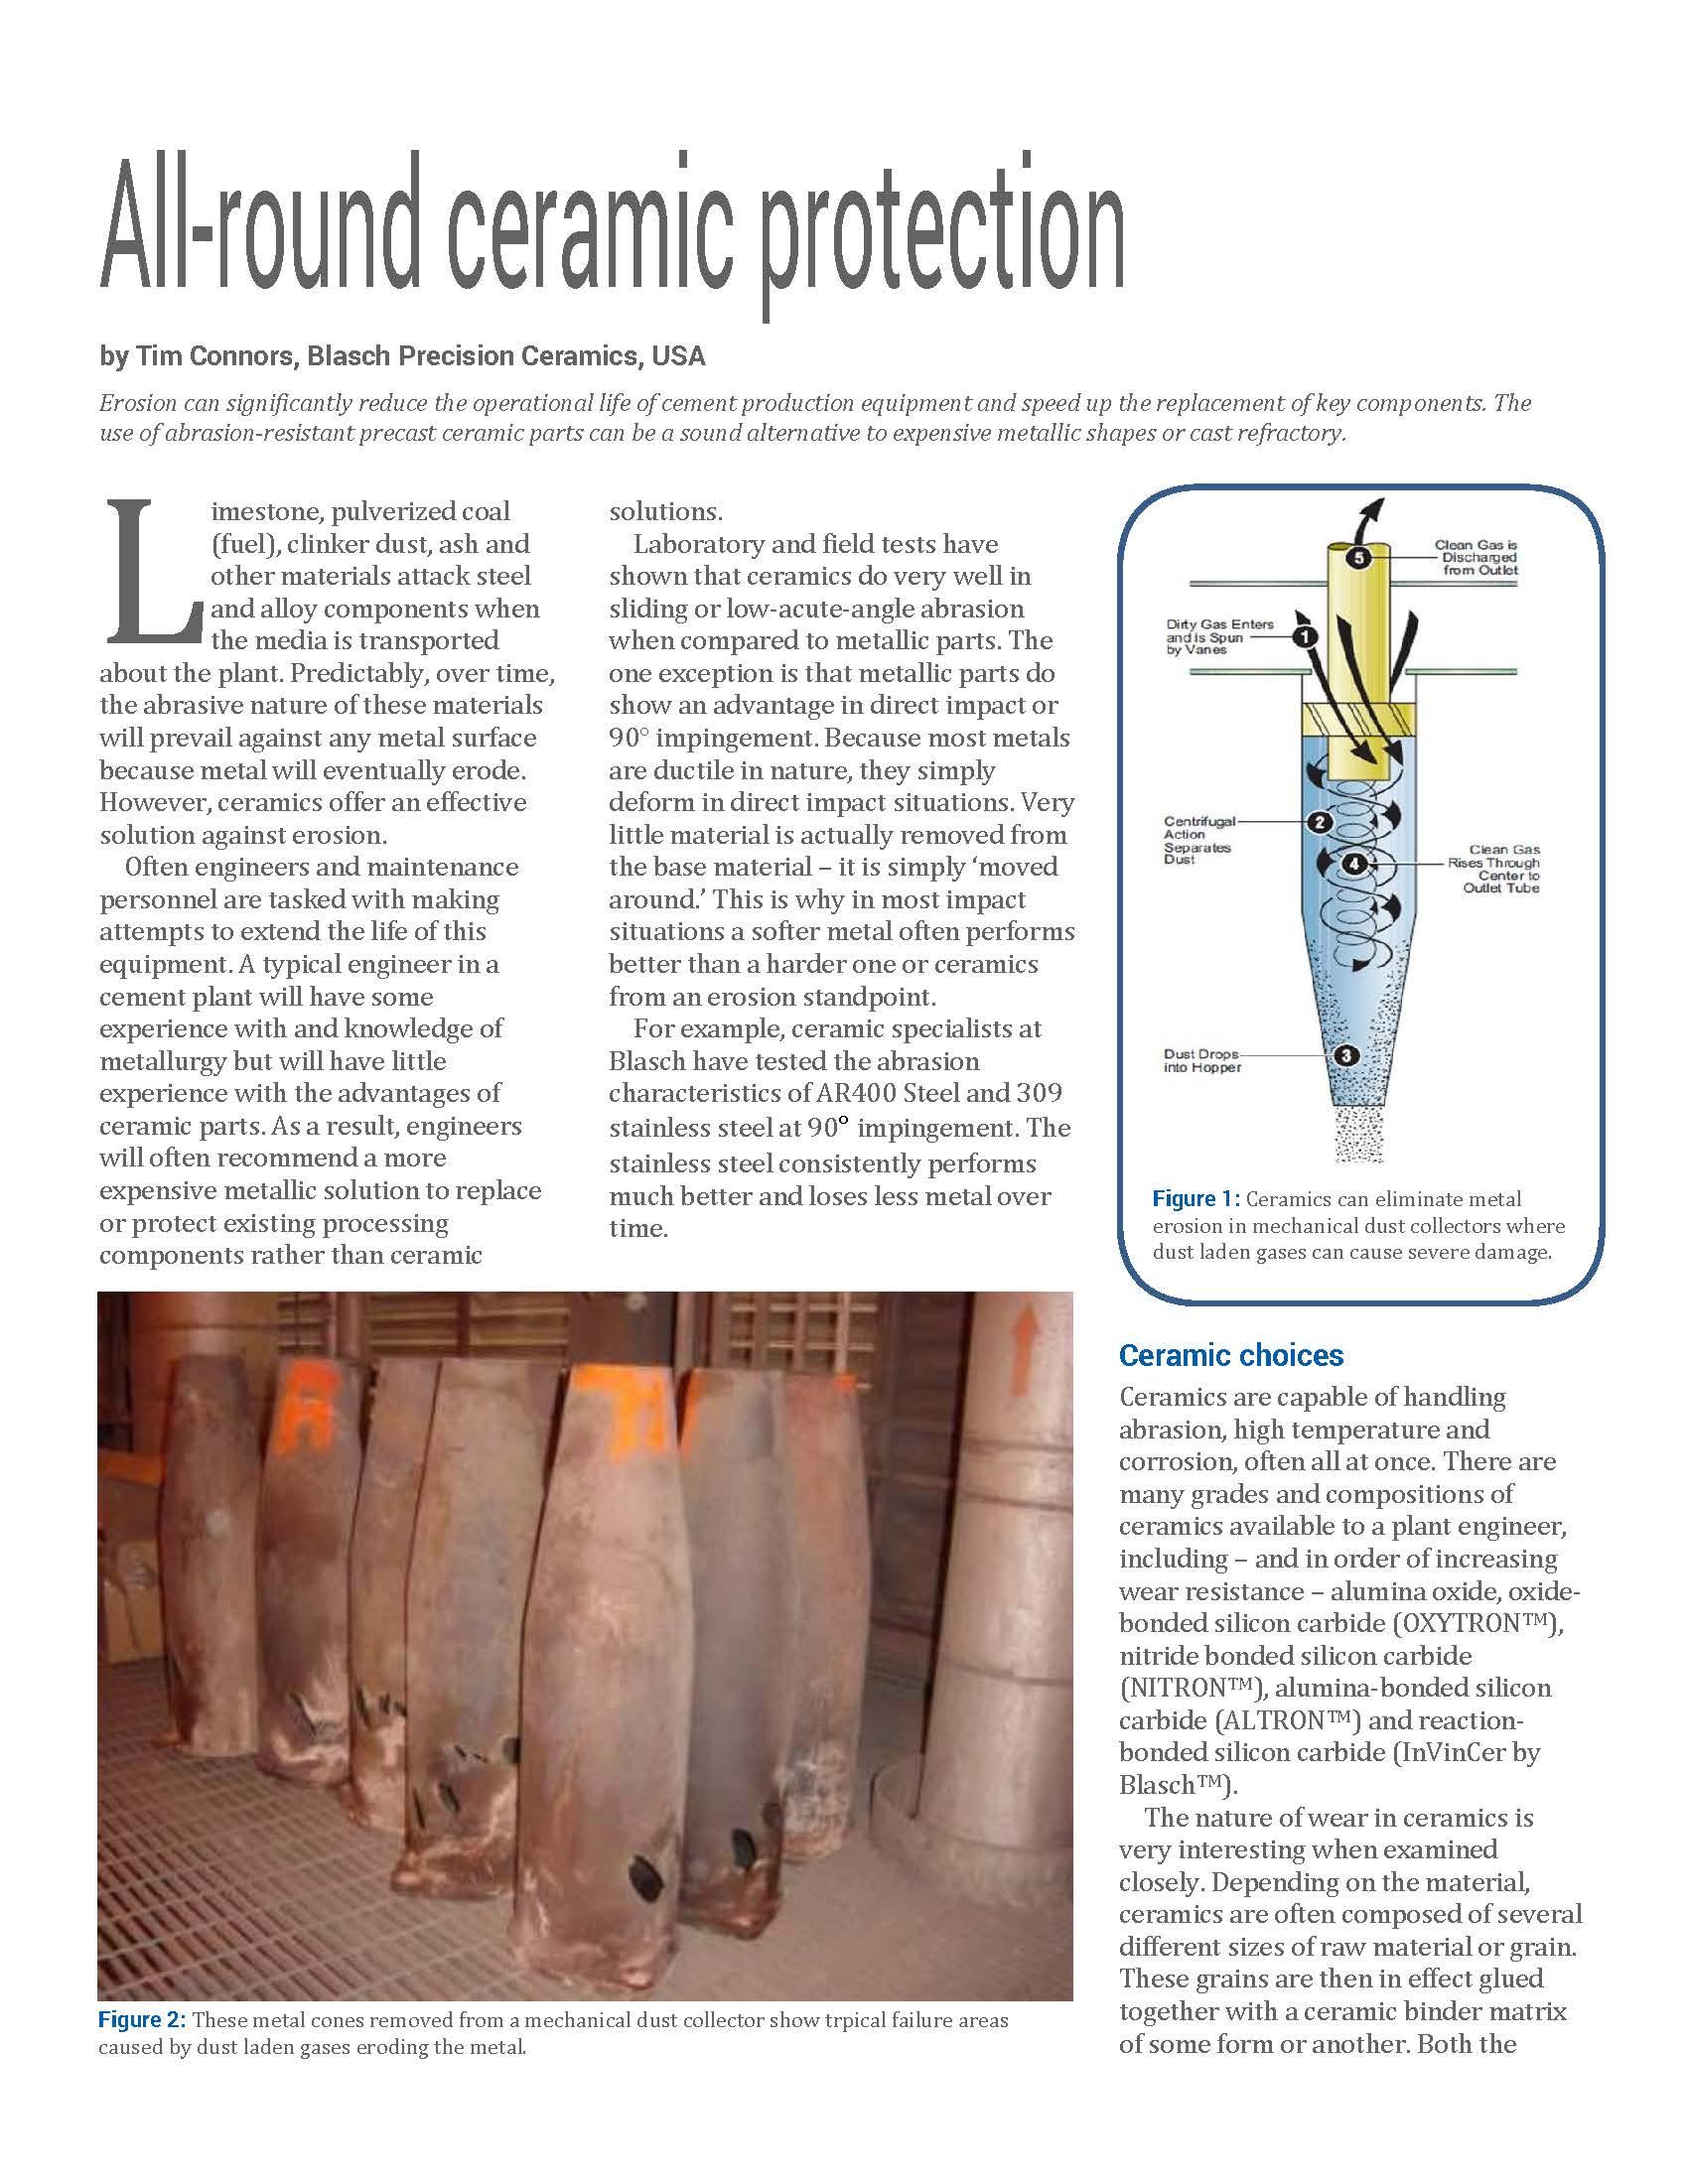 First page of "All-round ceramic protection" white paper